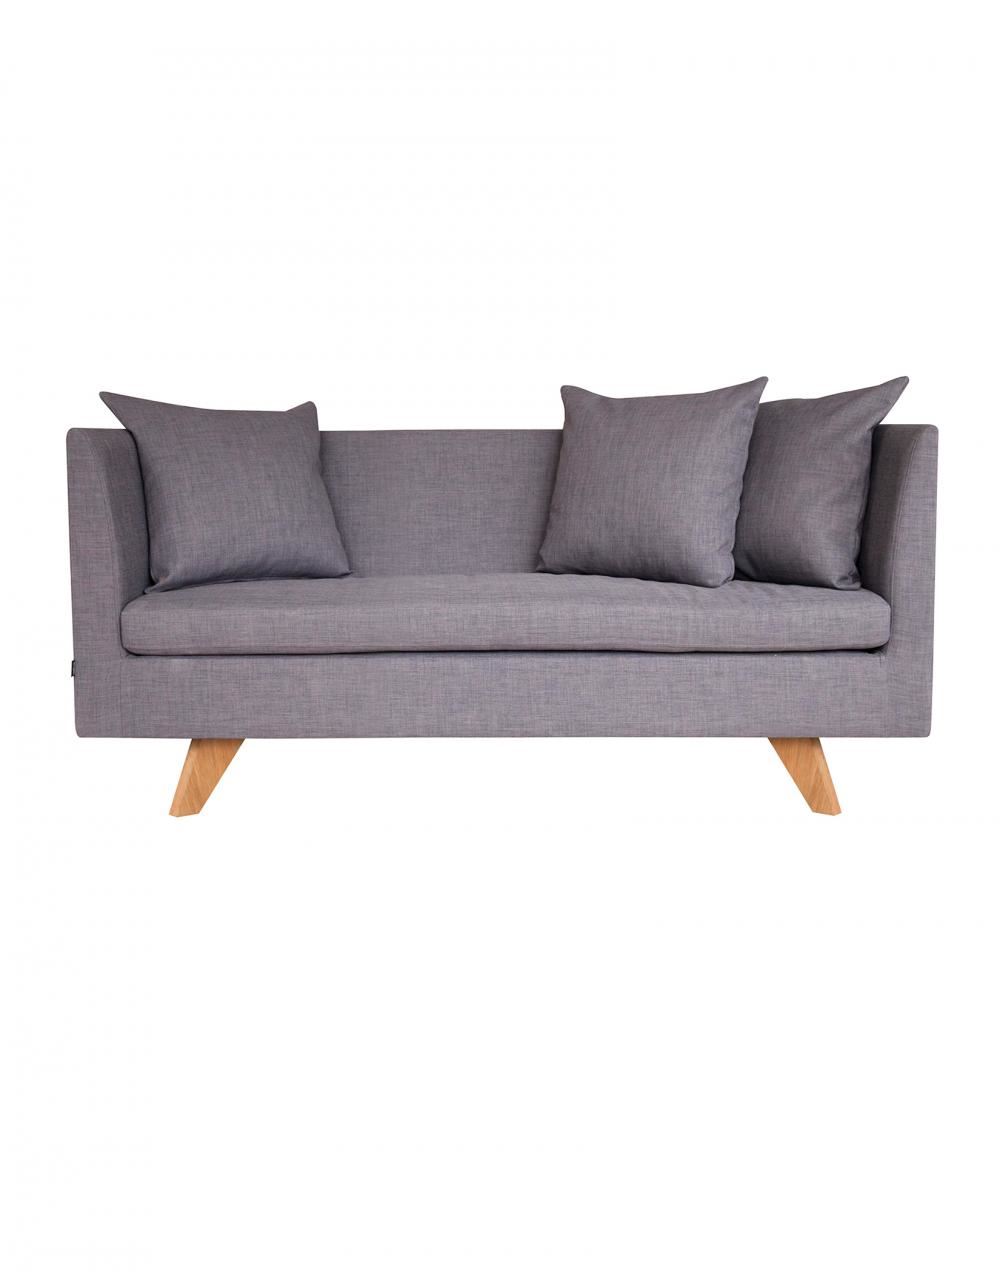 Stunder Dining Sofa 165 Fabric Group 3 Oak Natural Oiled